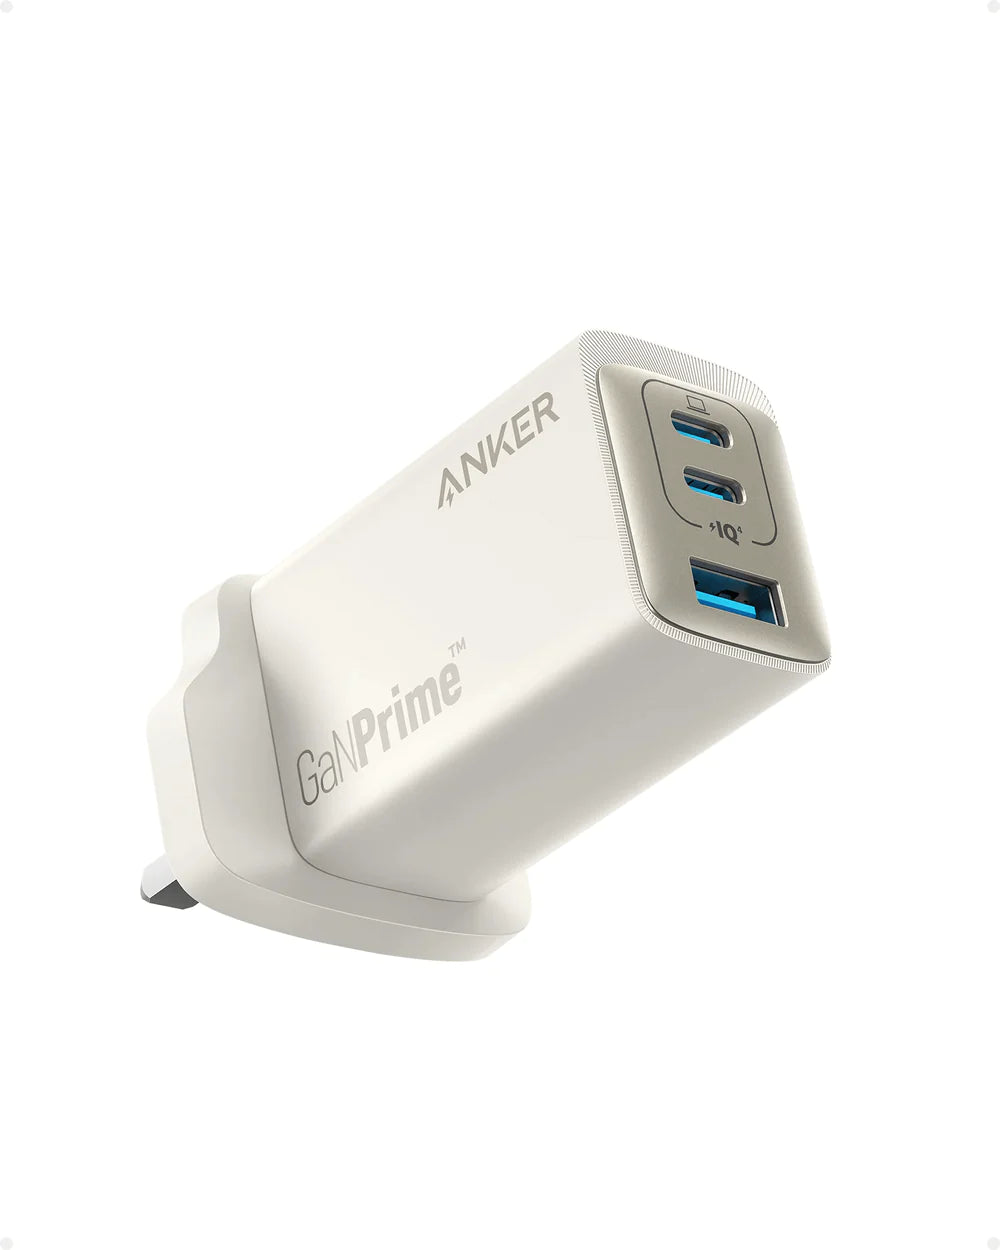 Anker 735 Charger (GaN Prime 65W)